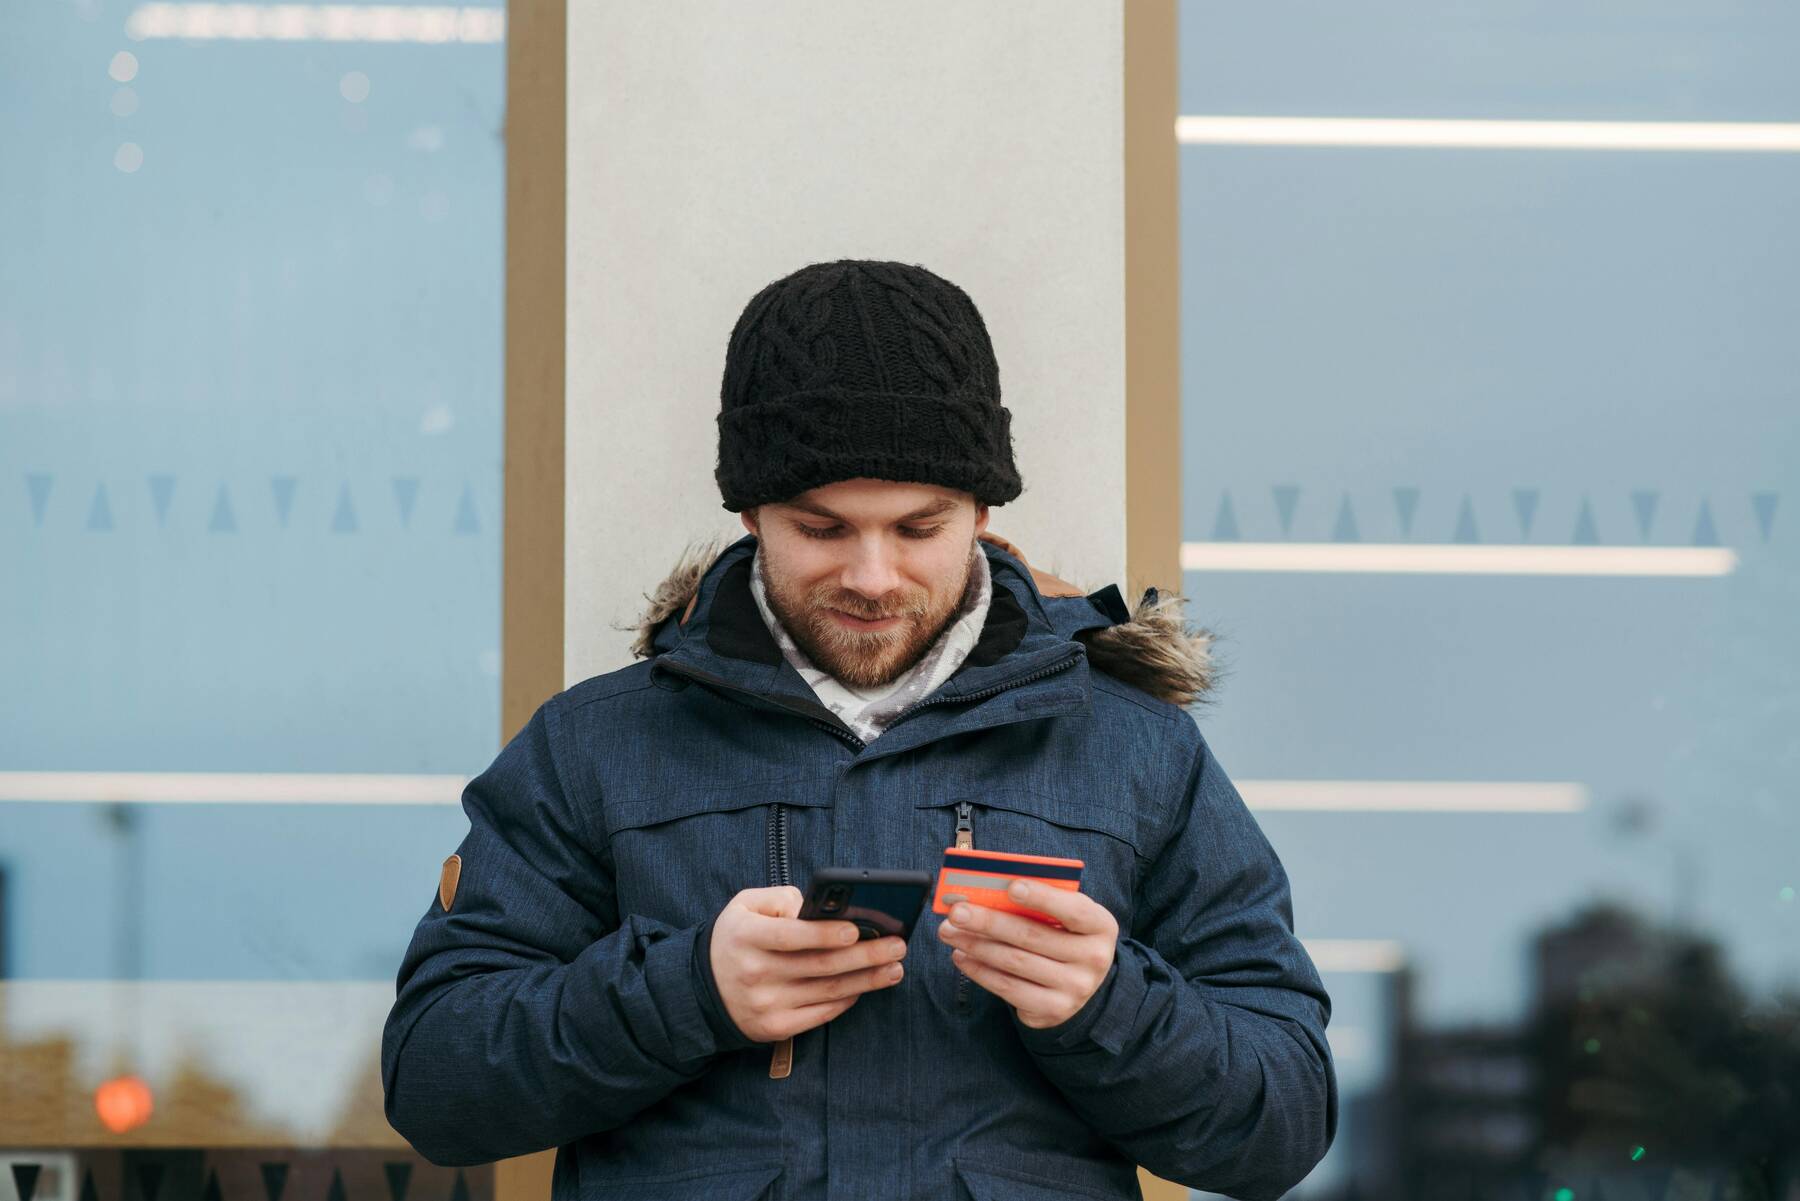 A man outside holding his phone and credit card